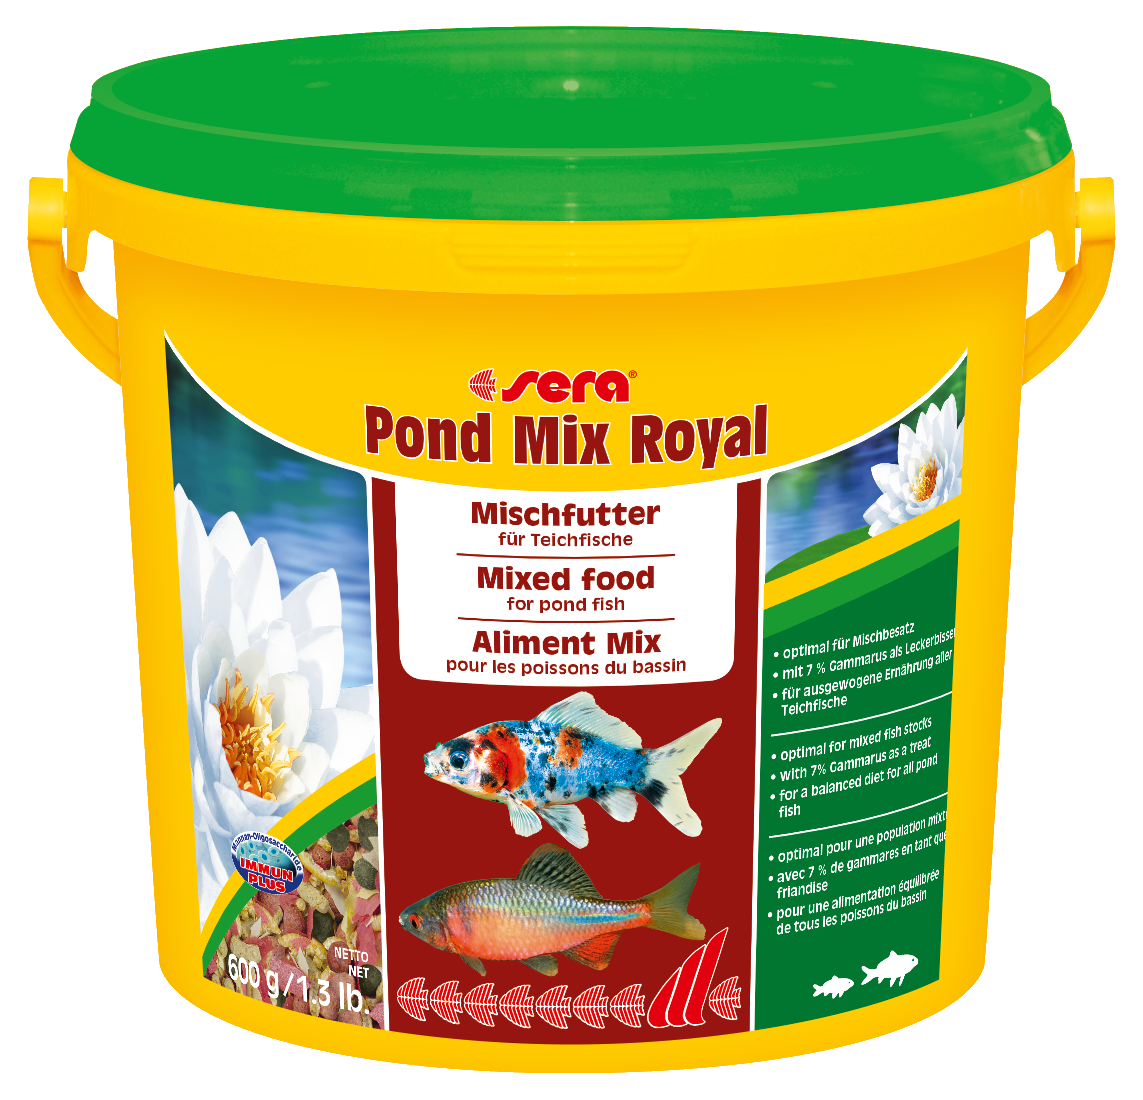 Fischmischfutter "Pond" Mix Royal 600 g + product picture